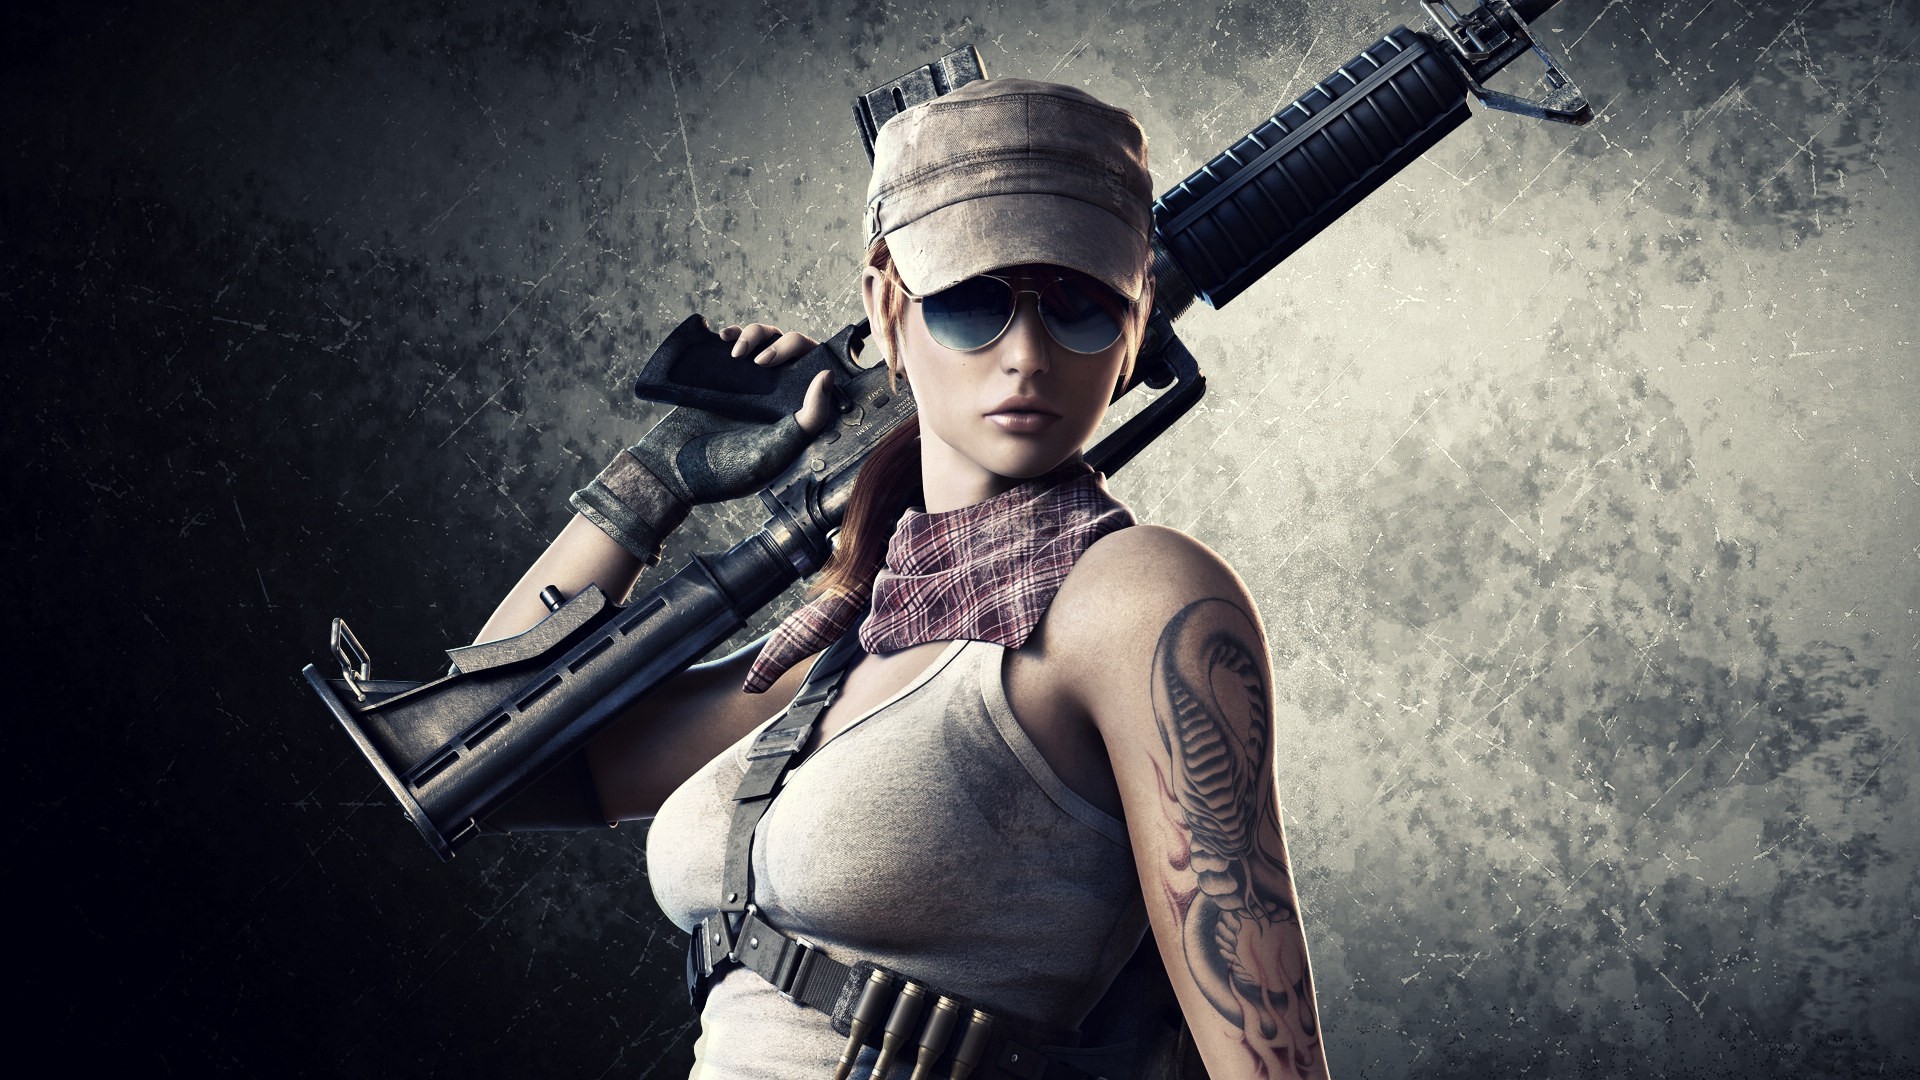 1920x1080 Tattoos Sunglasses Rifle Hat C-G weapons weapon sexy babe girl wallpaper